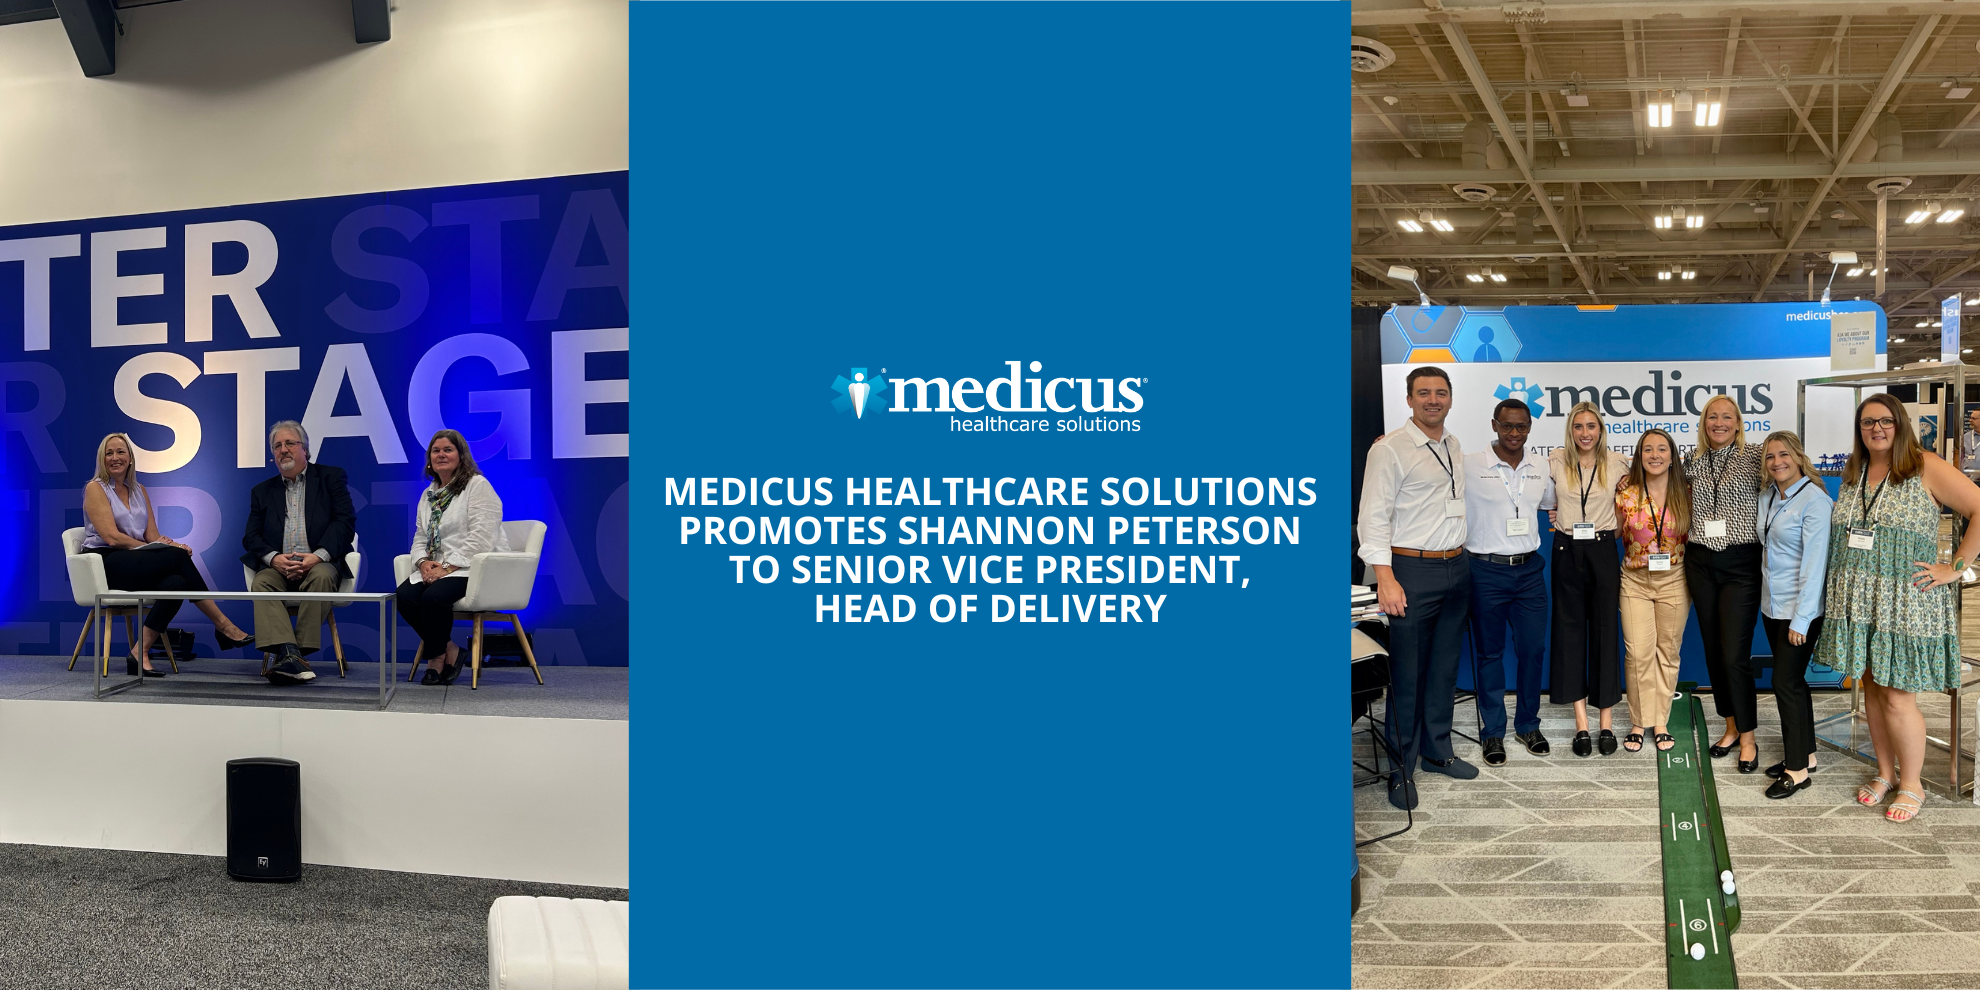 Medicus promotes Shannon Peterson to Senior Vice President, Head of Delivery